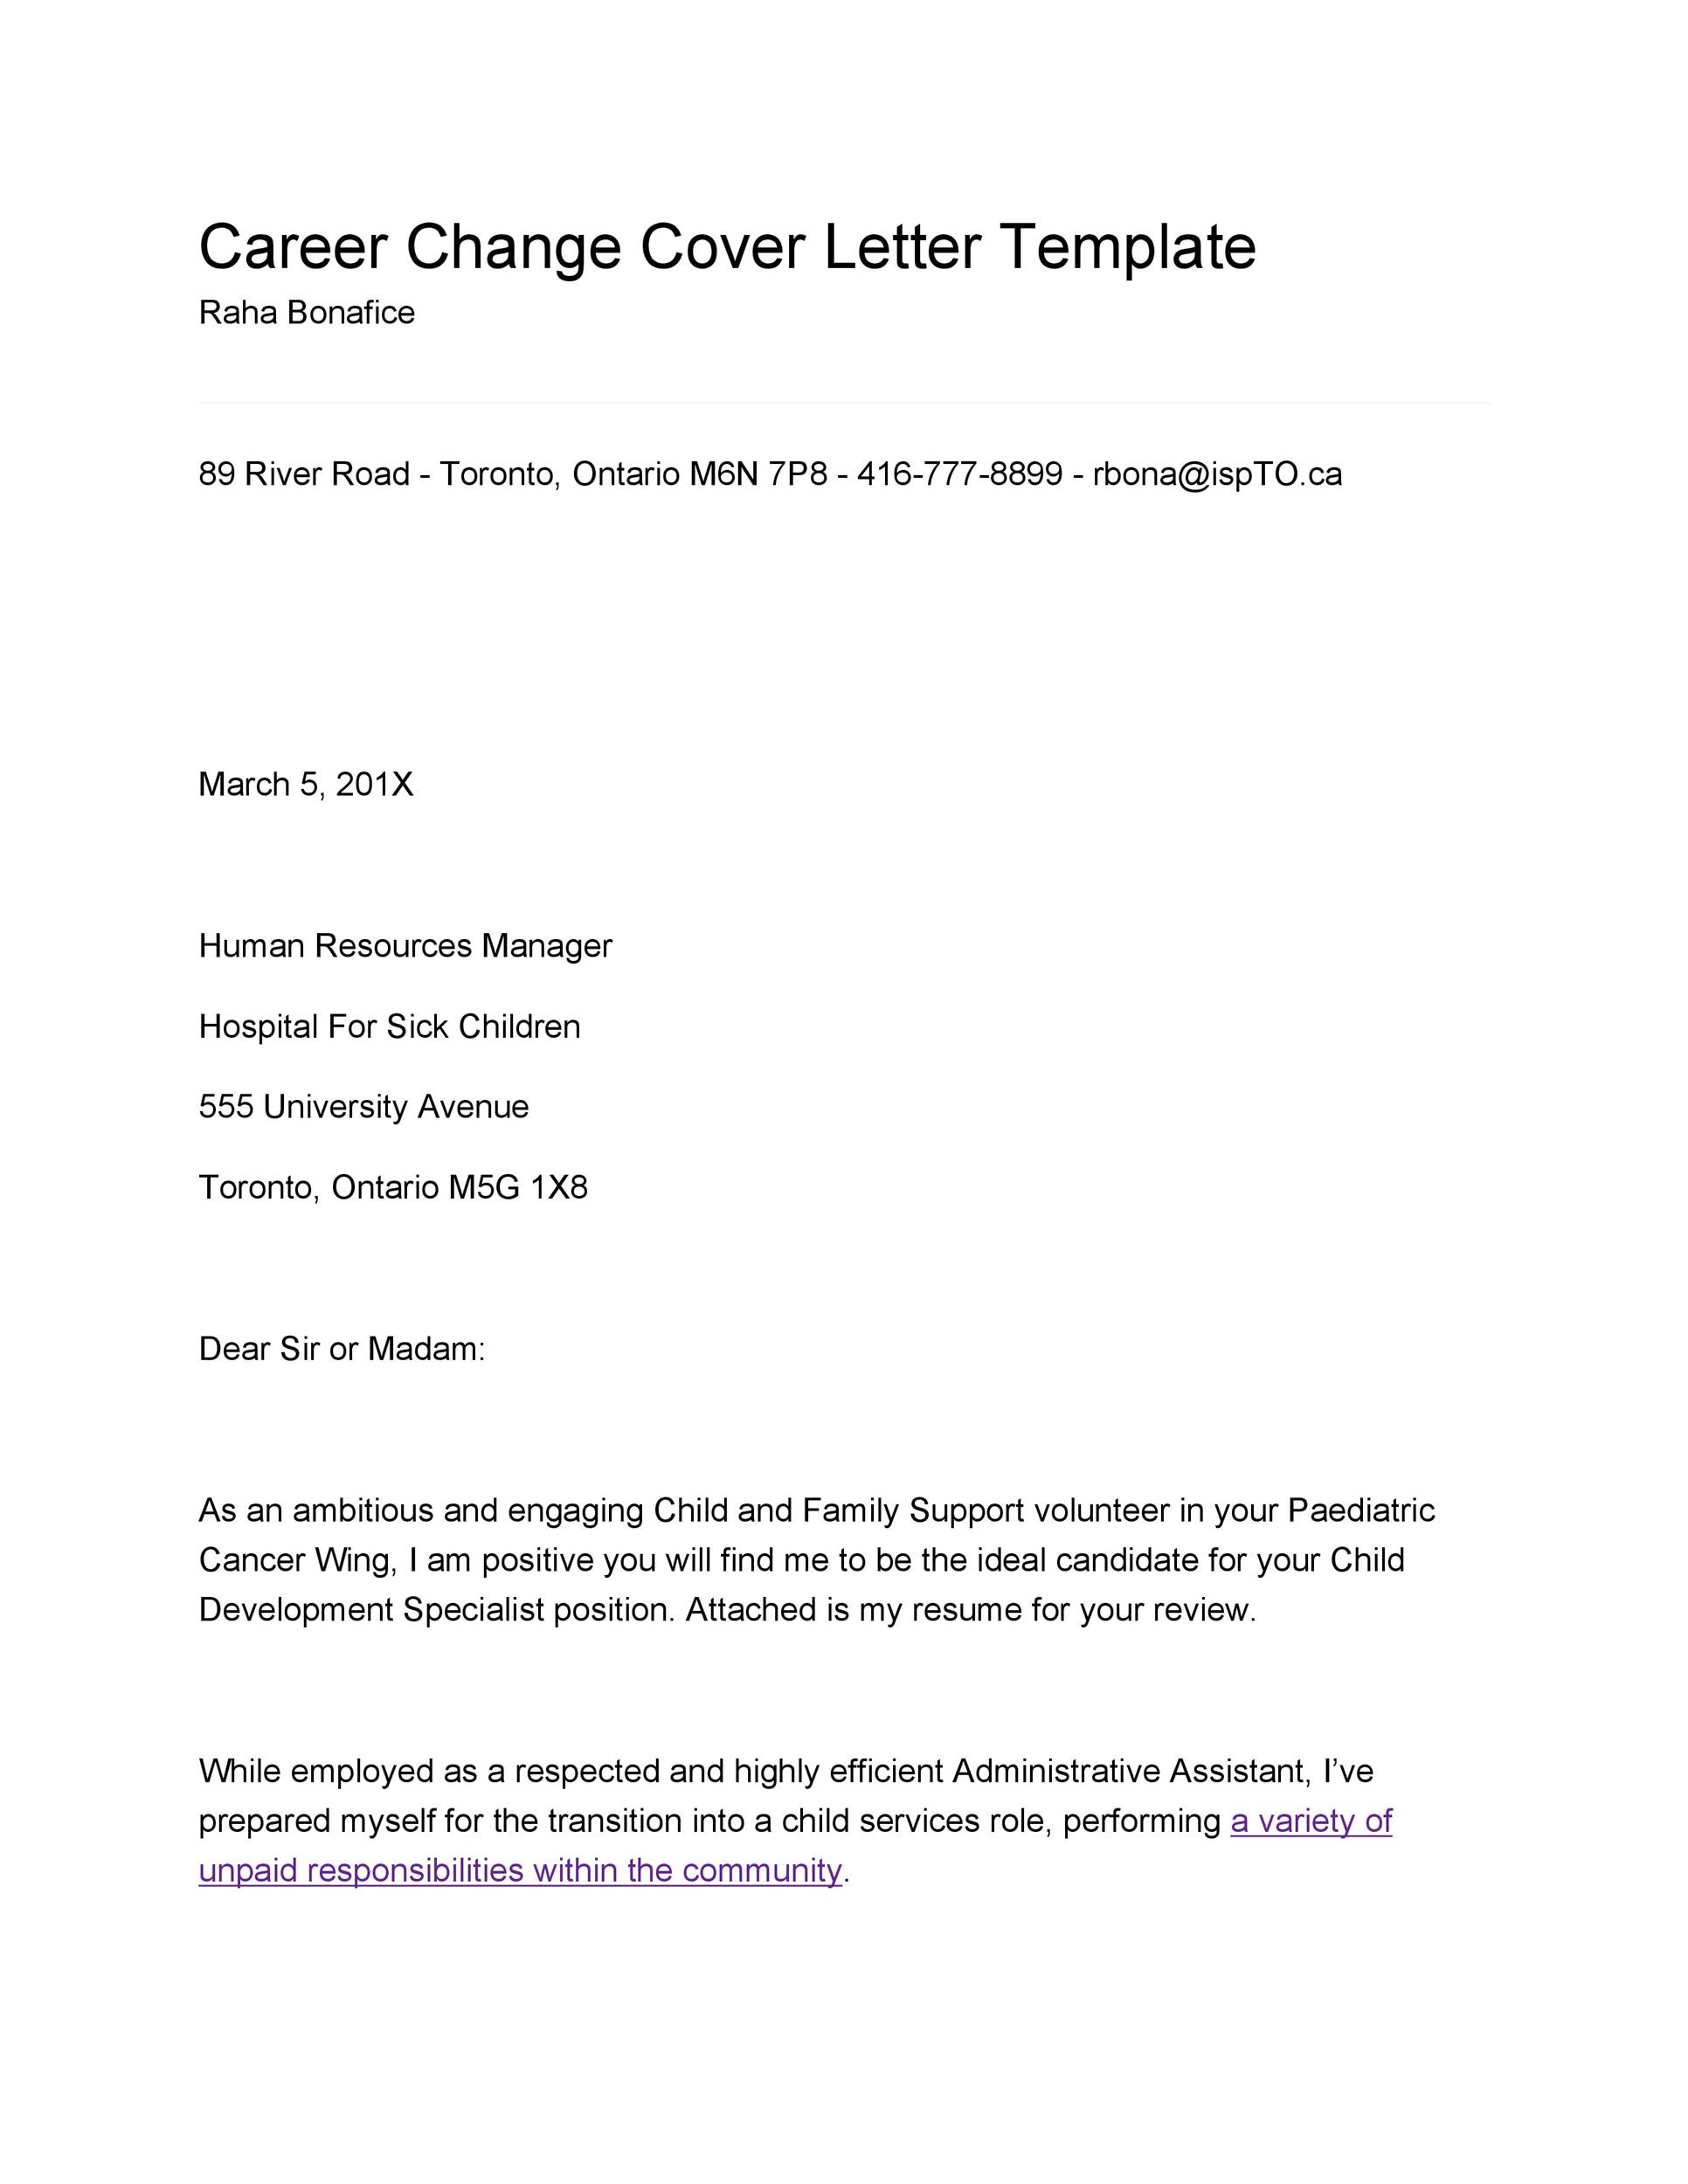 cover letter examples for change of career